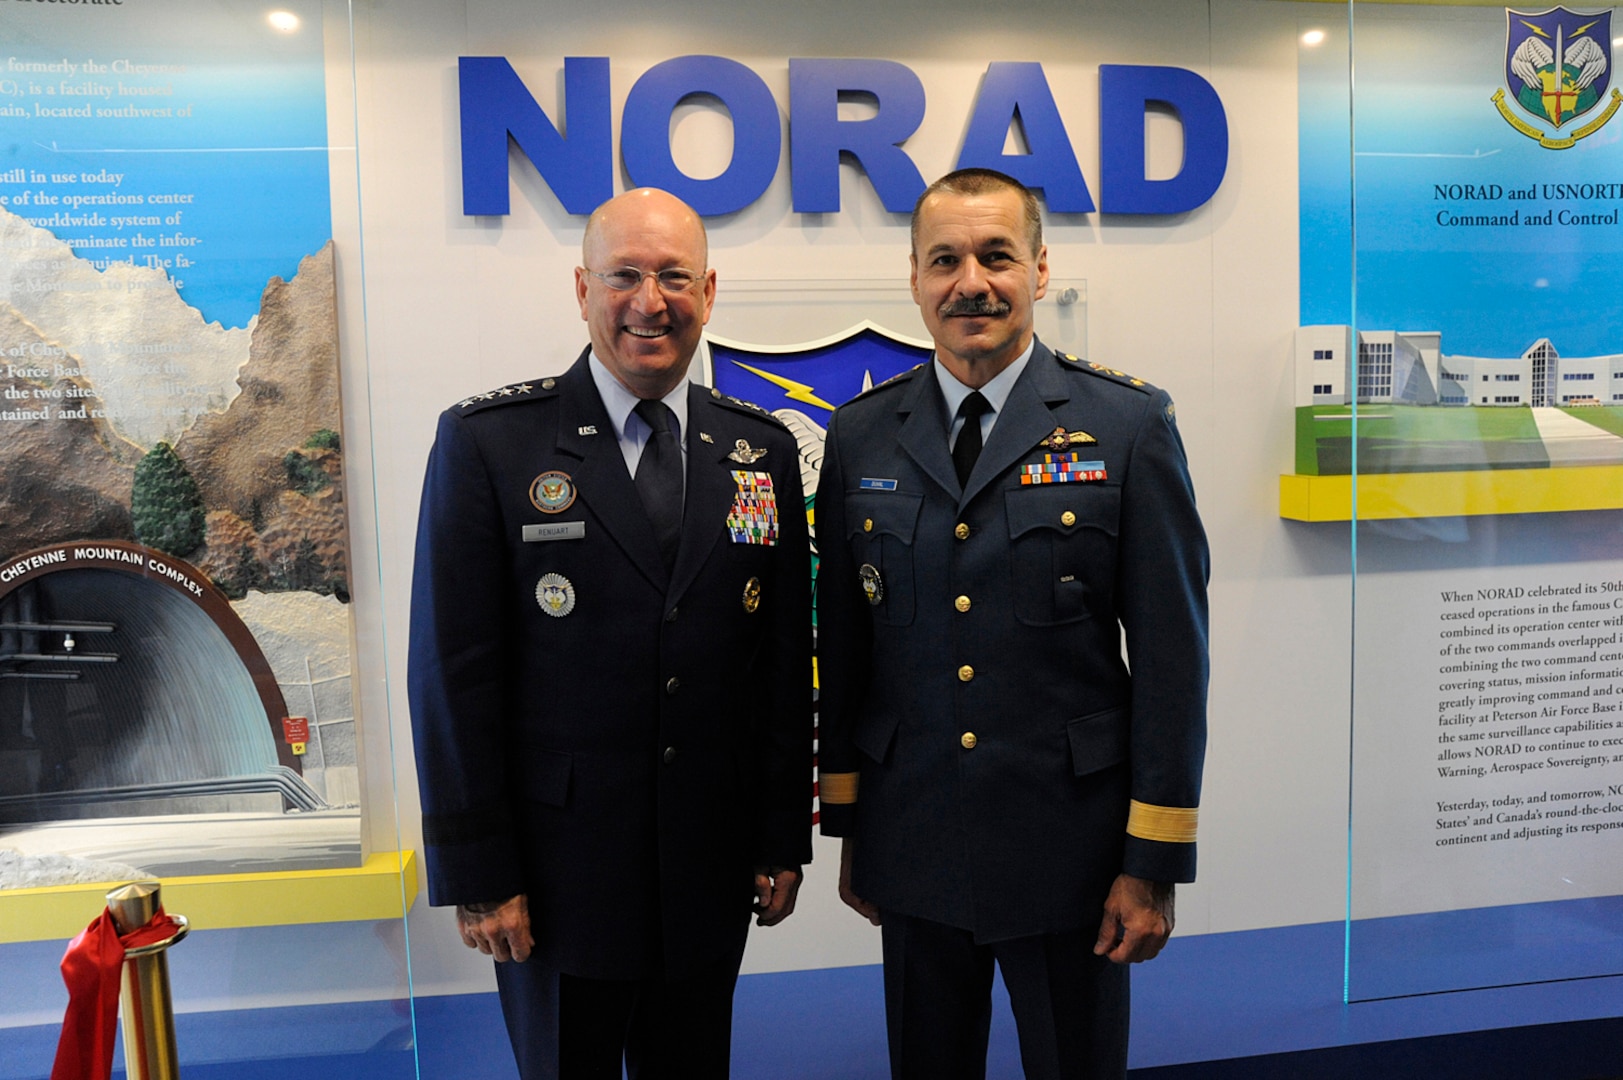 WASHINGTON, D.C. – Air Force Gen. Gene Renuart, North American Aerospace Defense Command and U.S. Northern Command commander, and Canadian Lt.-Gen. J.M. Duval, NORAD deputy commander, pose for a photo at the NORAD Corridor Exhibit ribbong cutting ceremony at the Pentagon April 28. 

(Photo by Juan R. Tricoche)